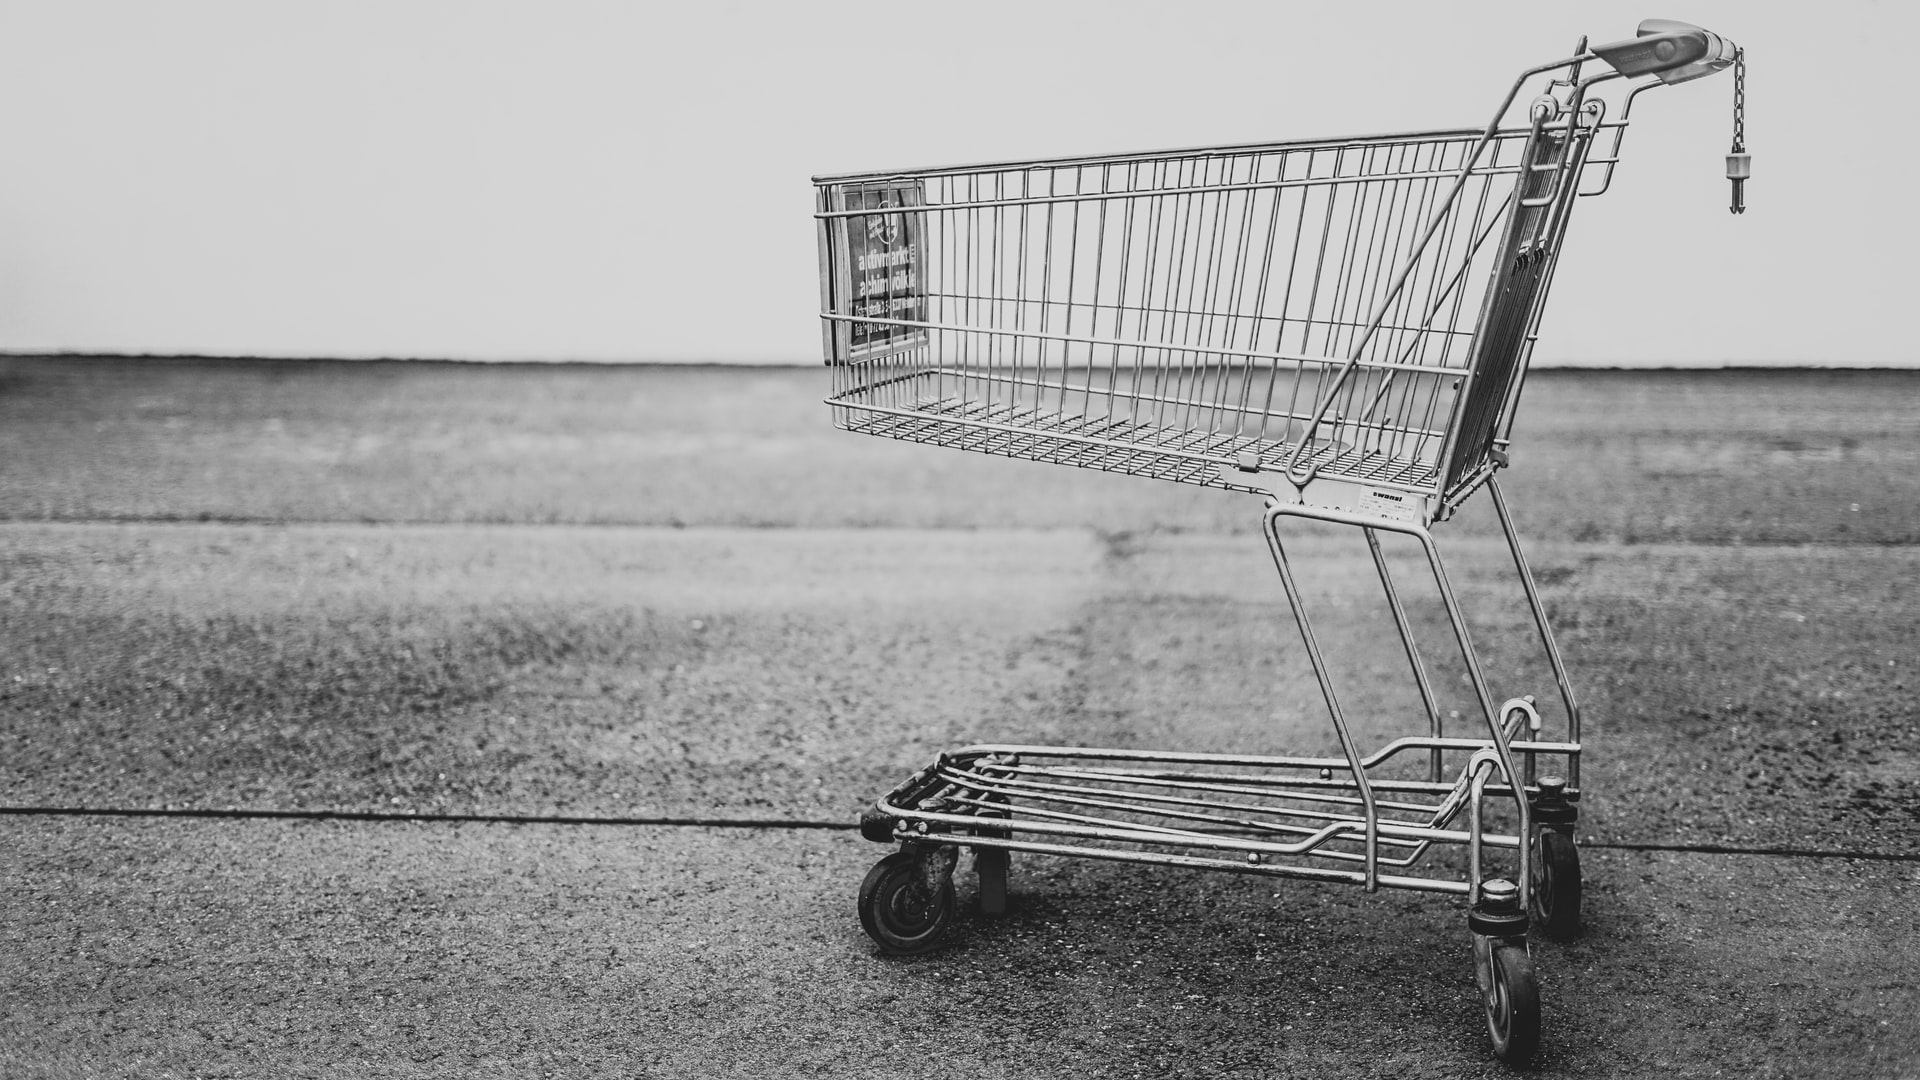 A grocery store cart on pavement, shown in black and white.